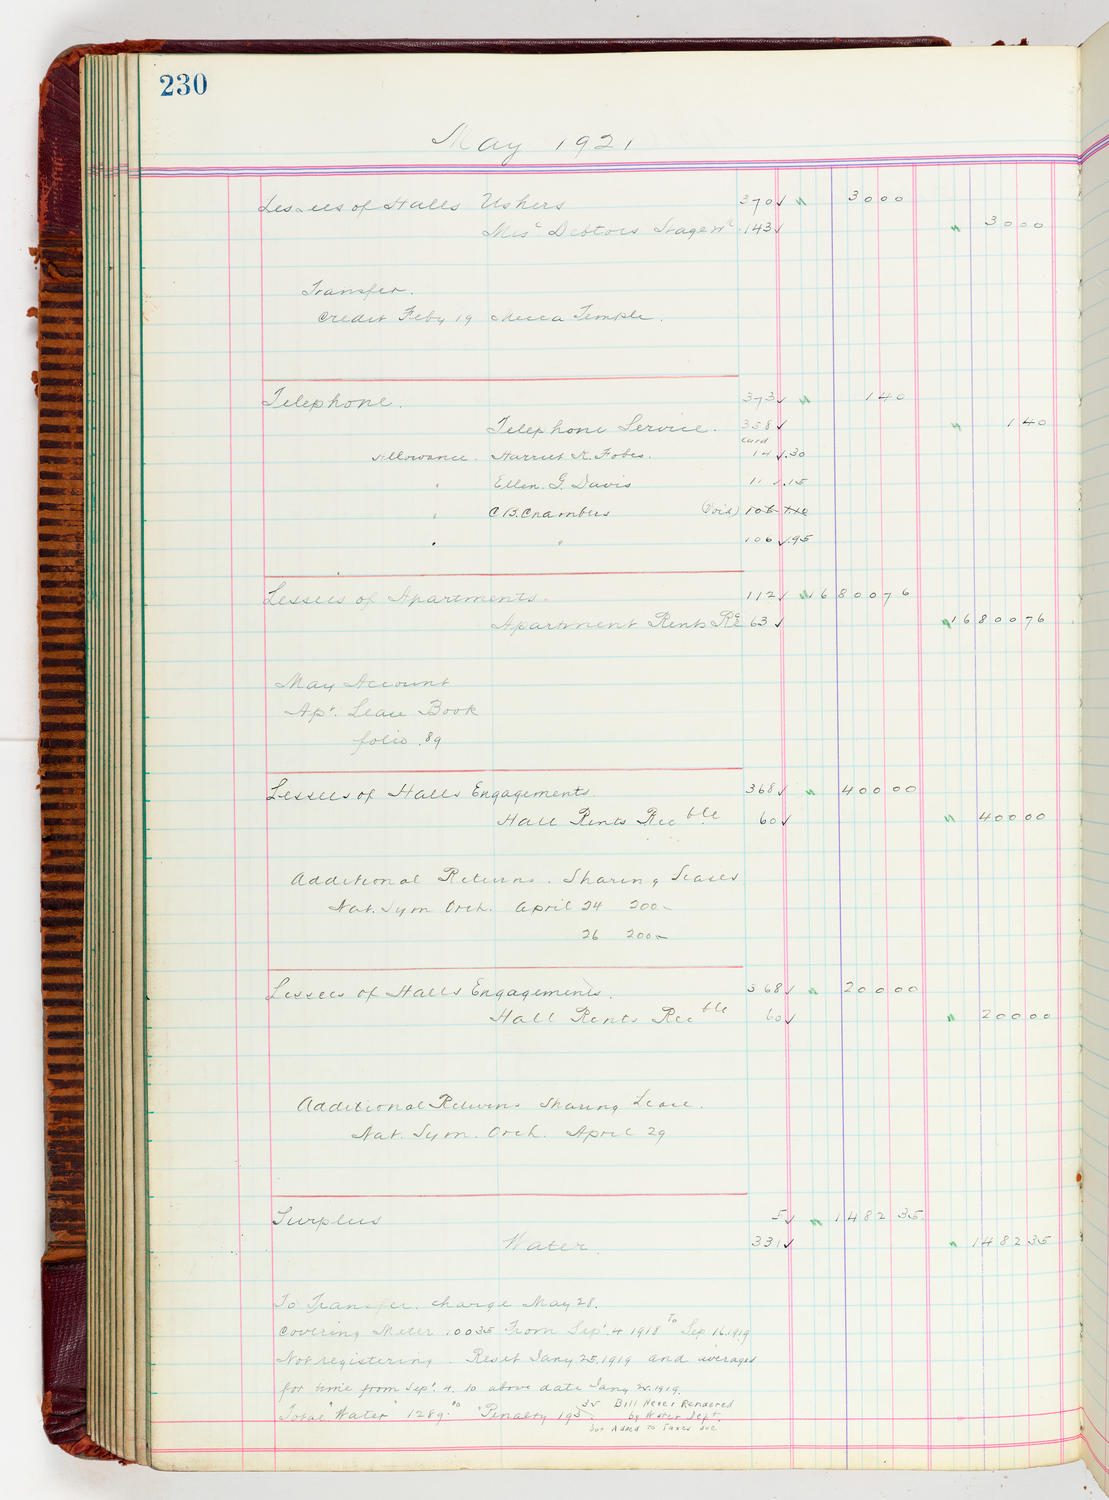 Music Hall Accounting Ledger, volume 5, page 230